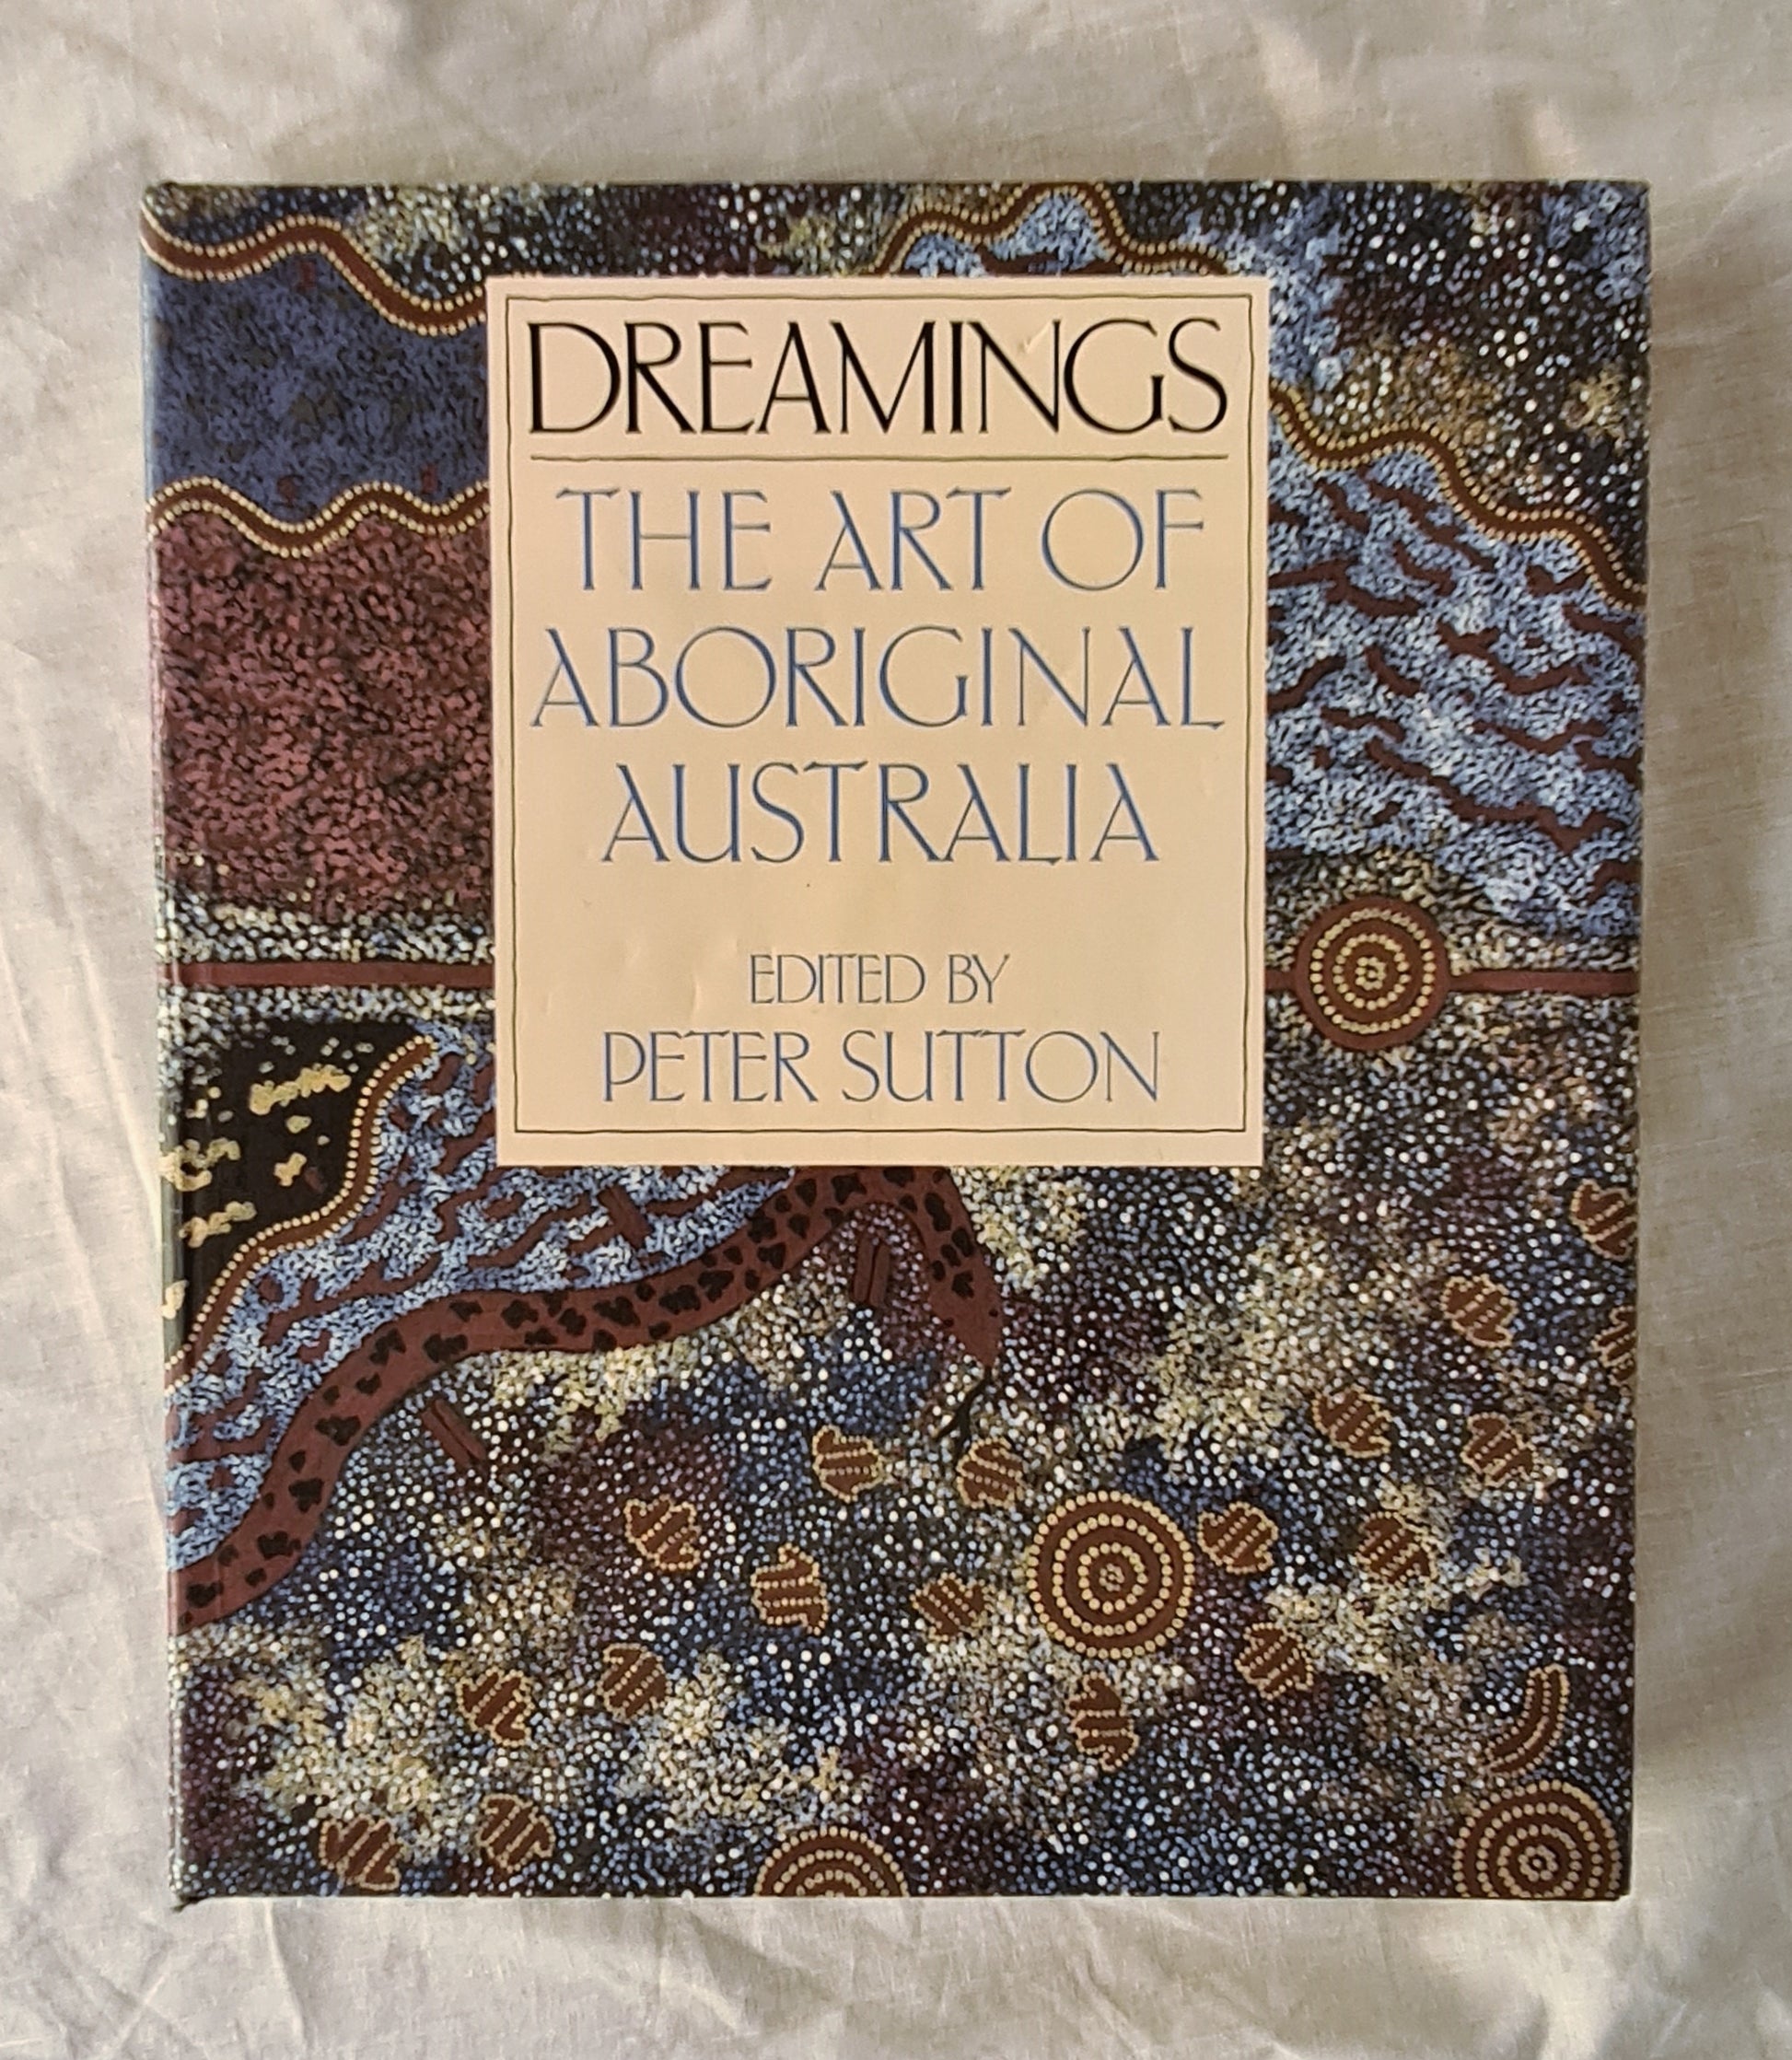 Dreamings  The Art of Aboriginal Australia  Edited by Peter Sutton